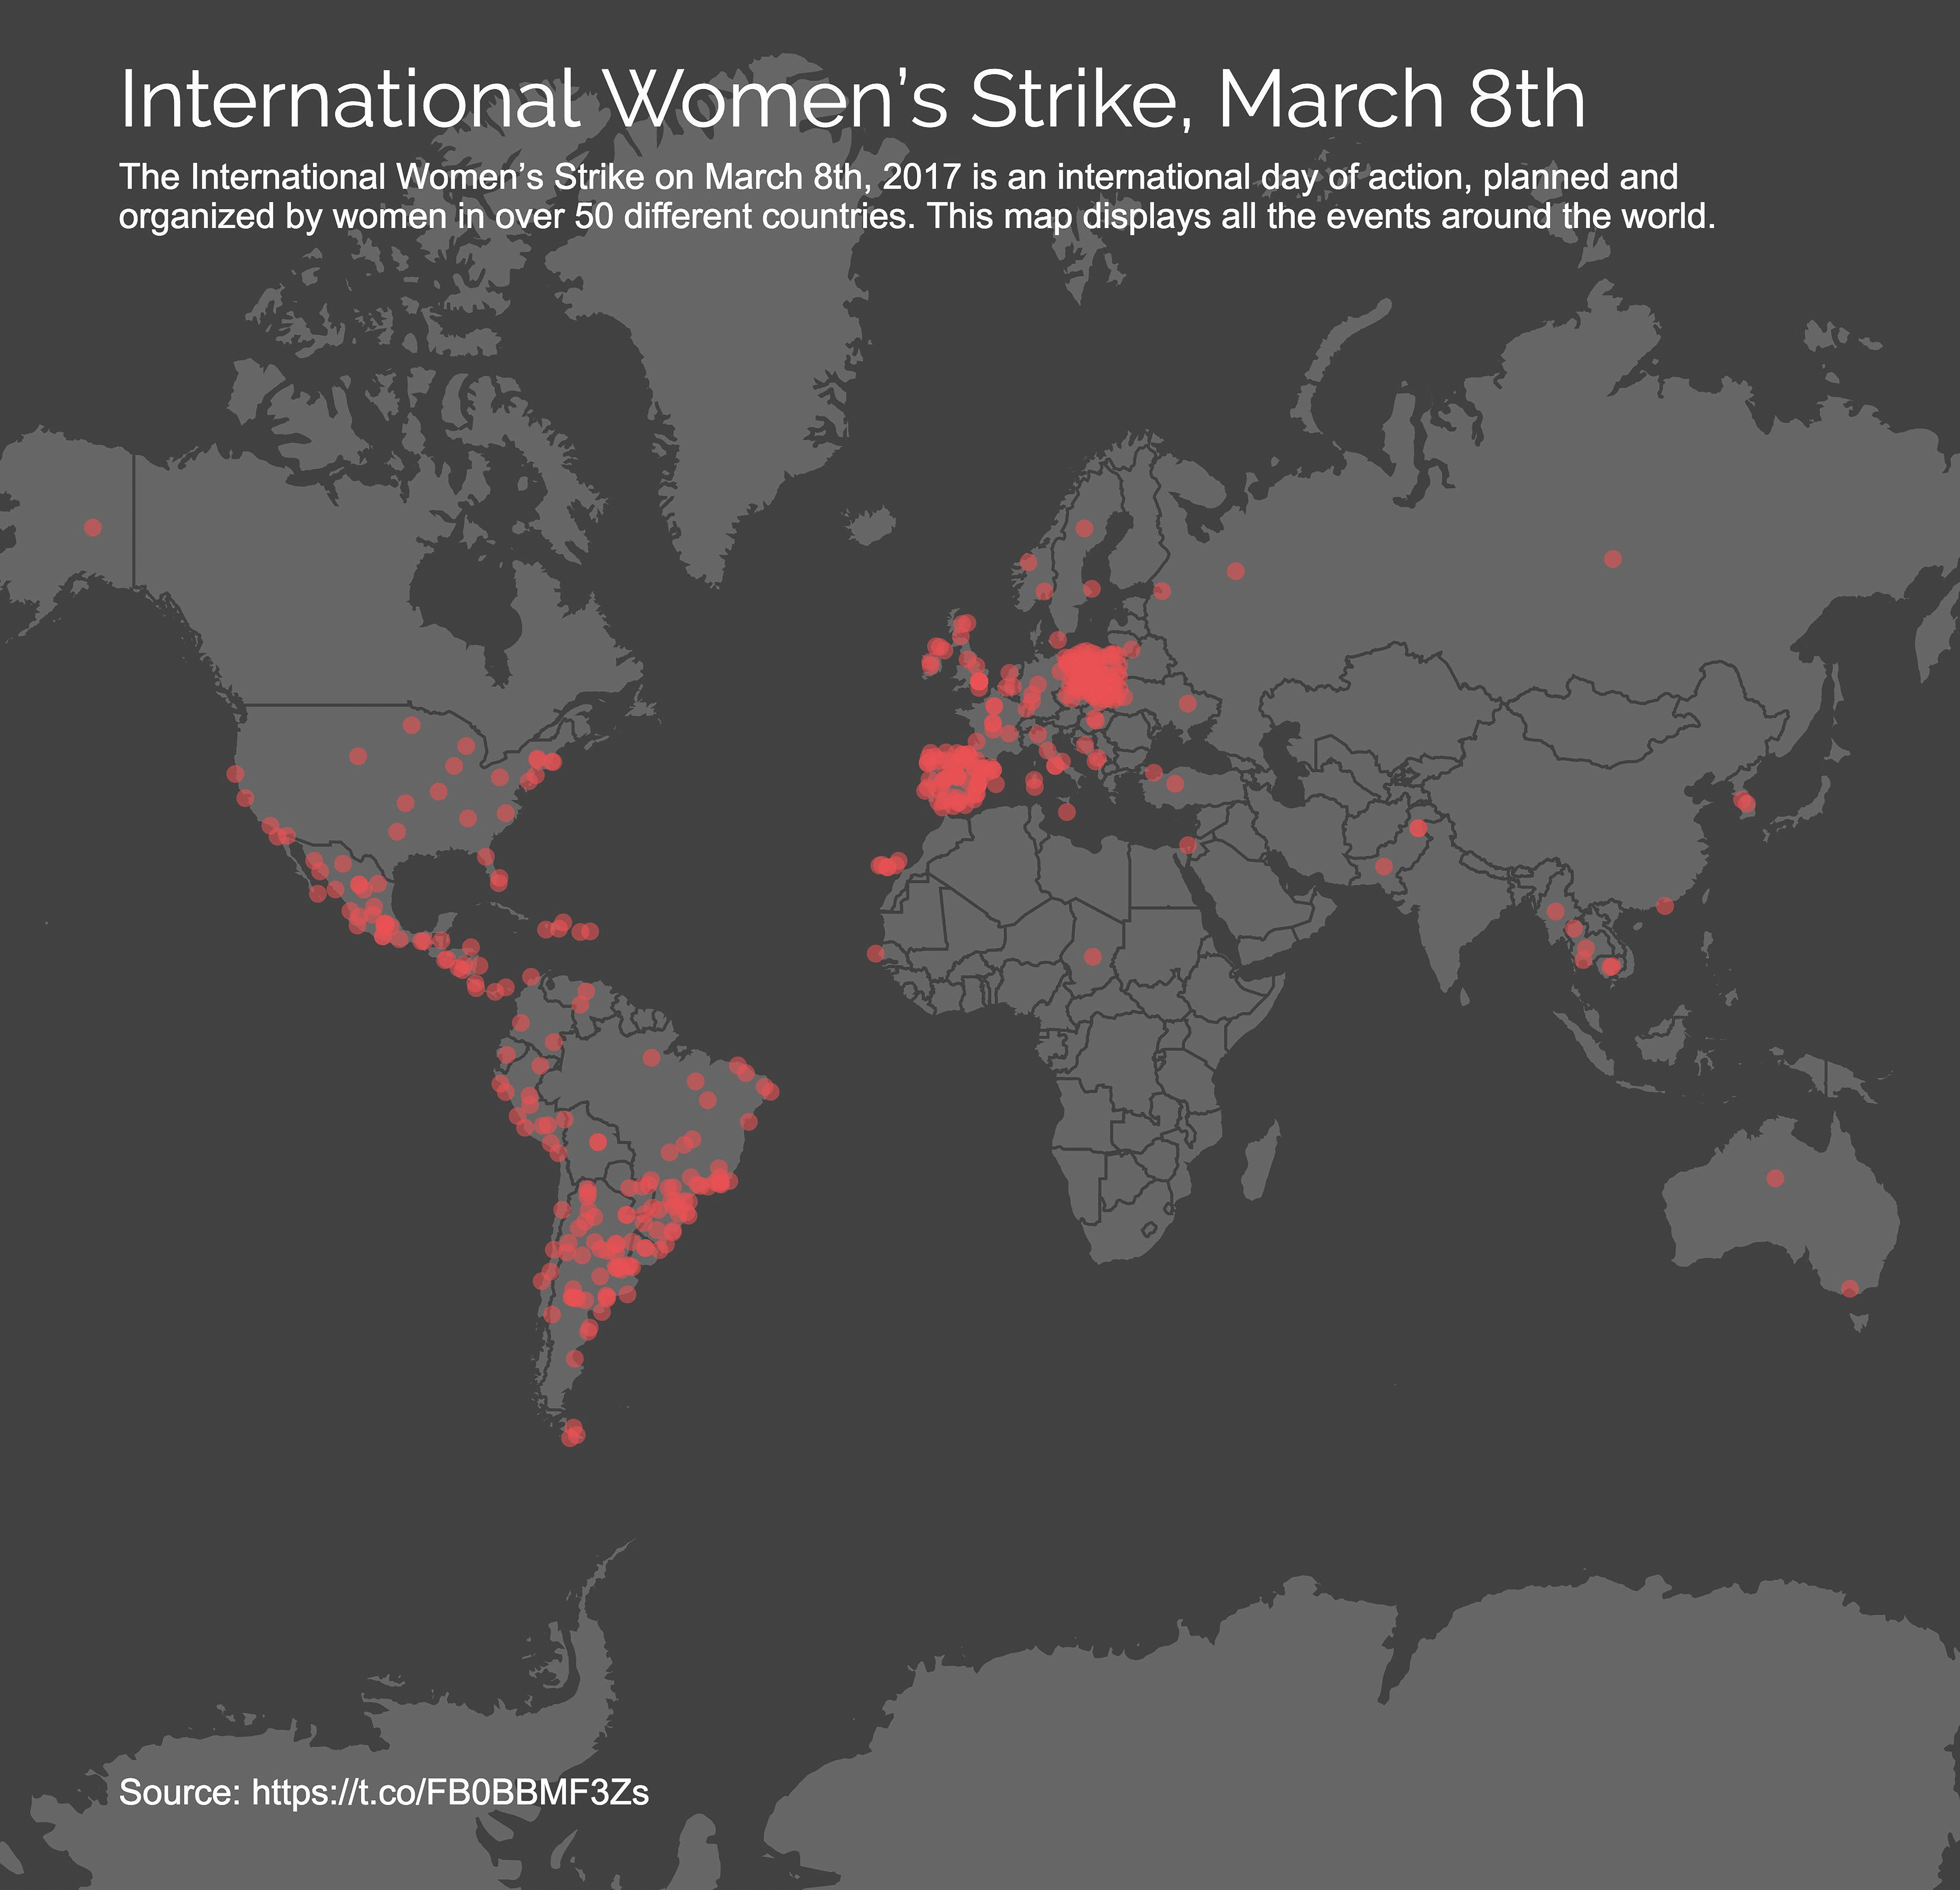 A map of the world showing the locations of international women’s strike events on March 8th 2017 with red dots, with large clusters in North and South America and Europe.